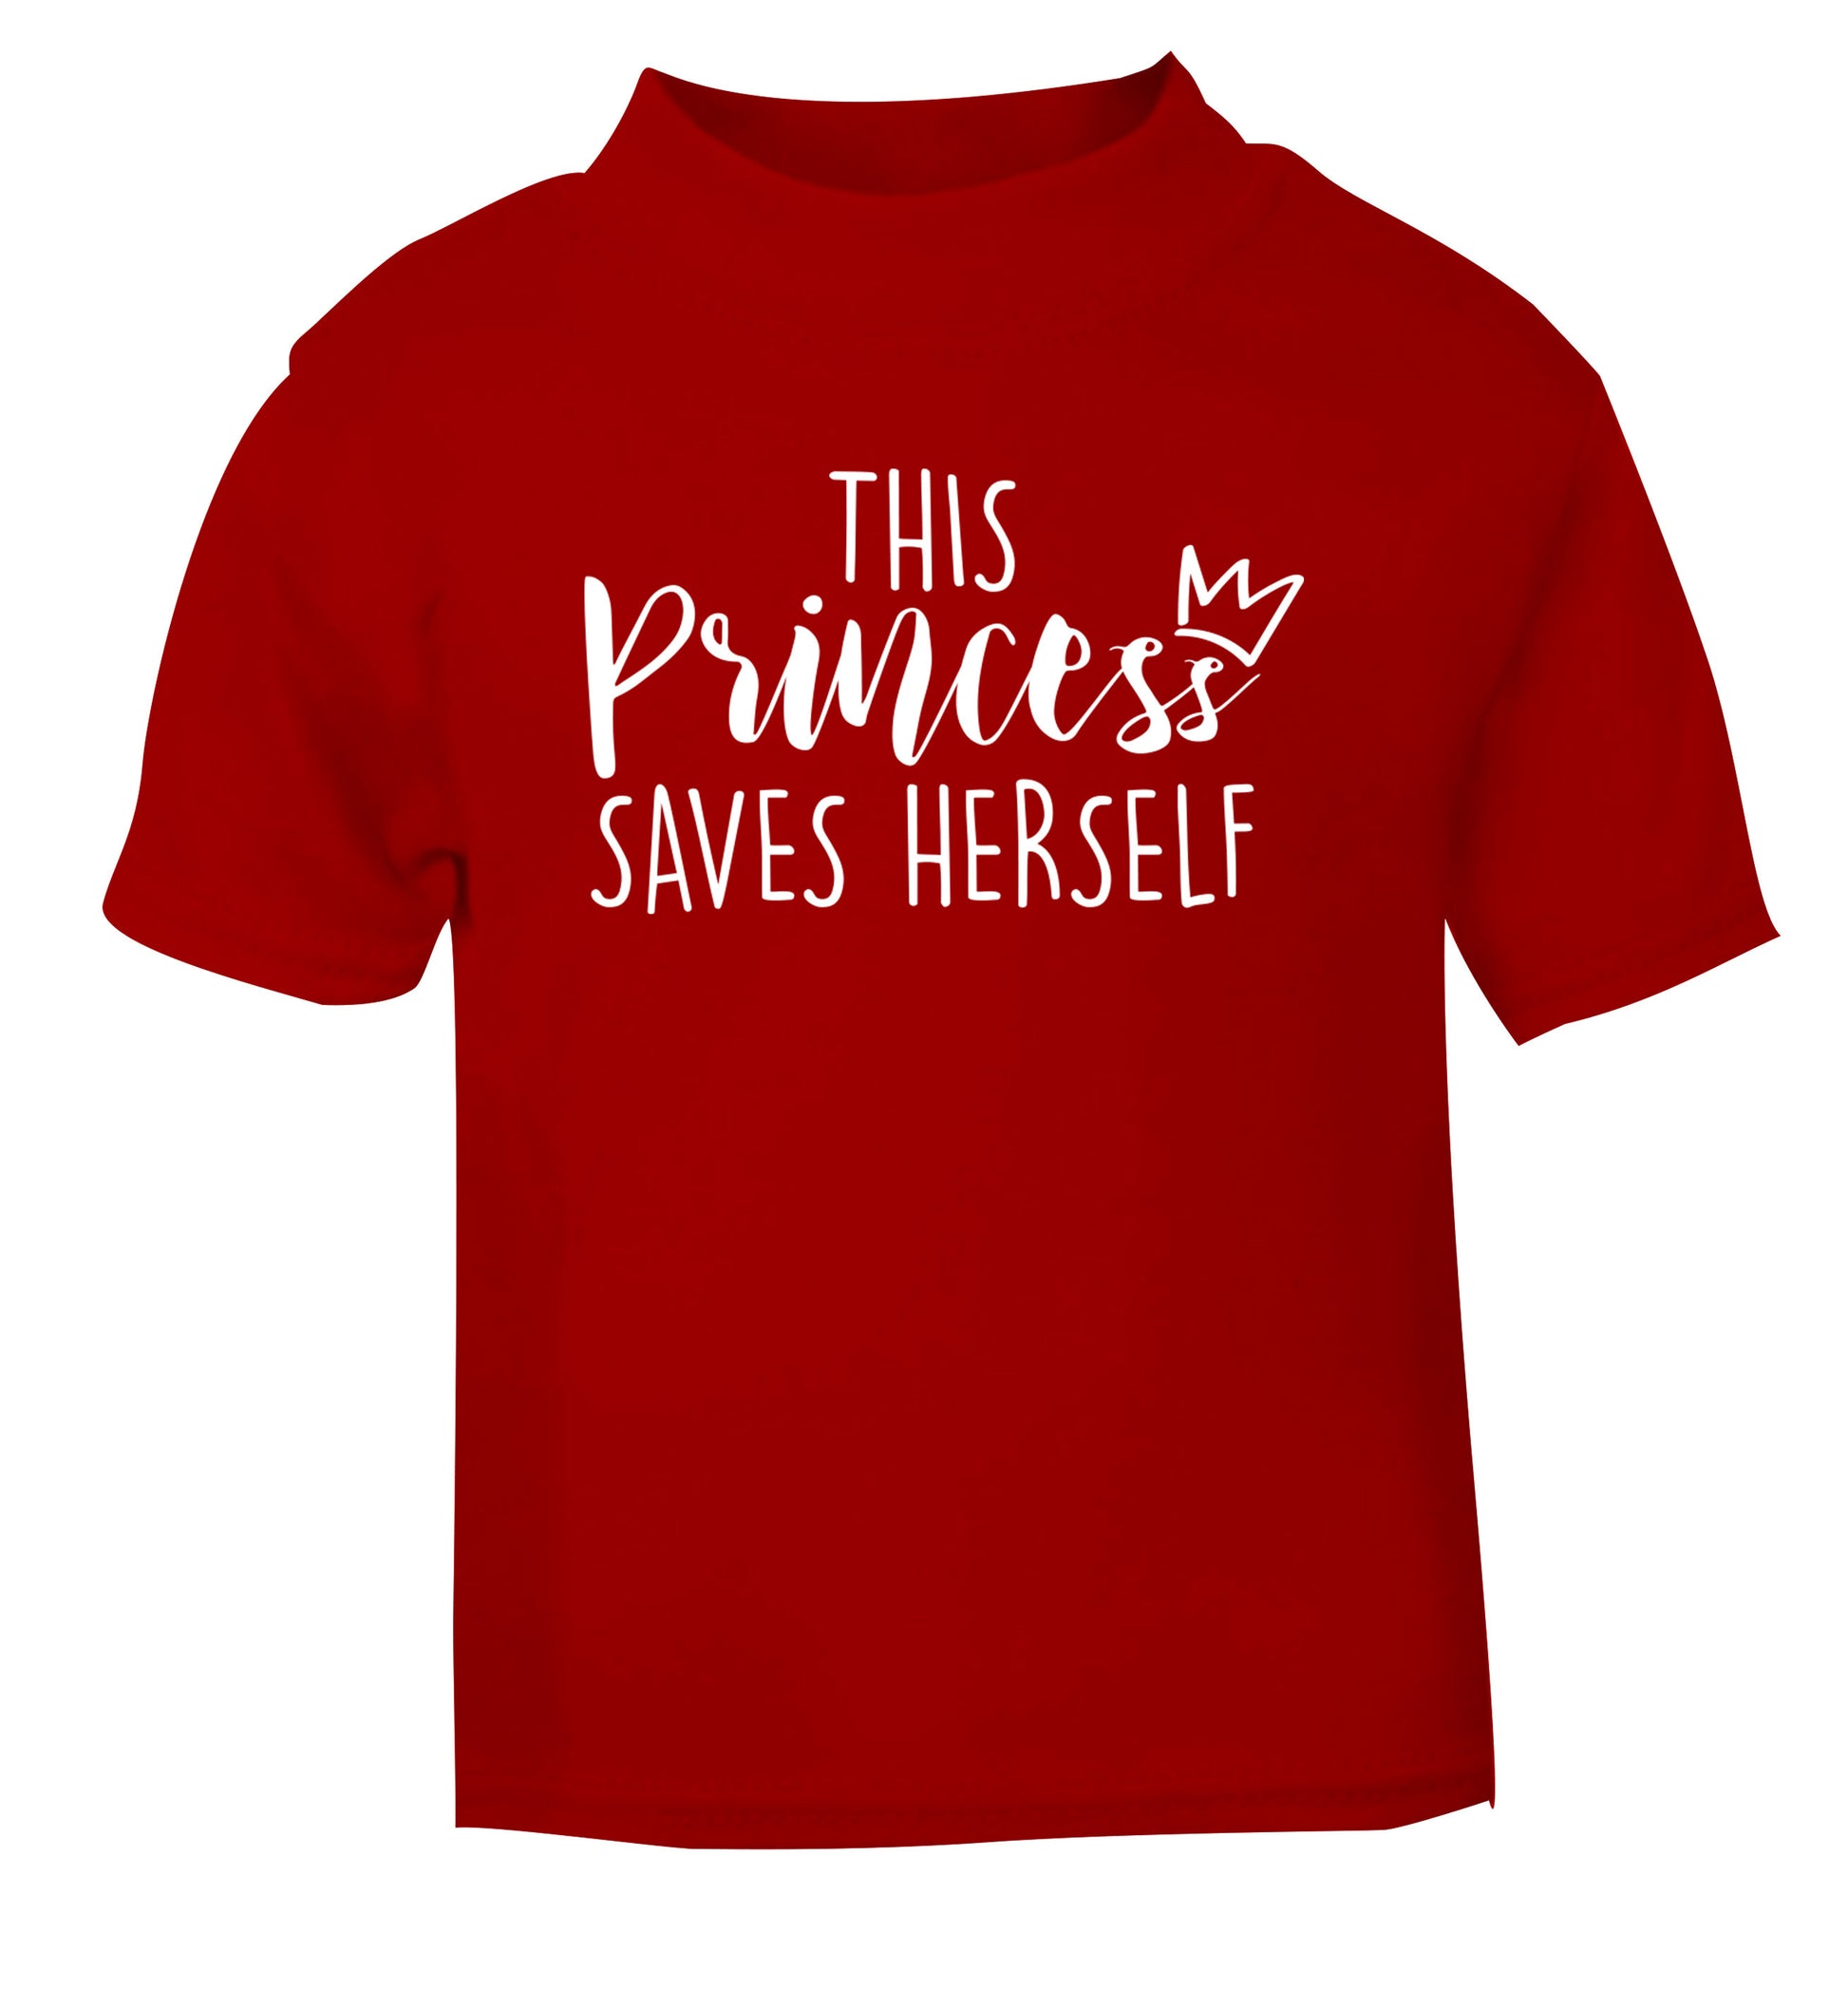 This princess saves herself red Baby Toddler Tshirt 2 Years